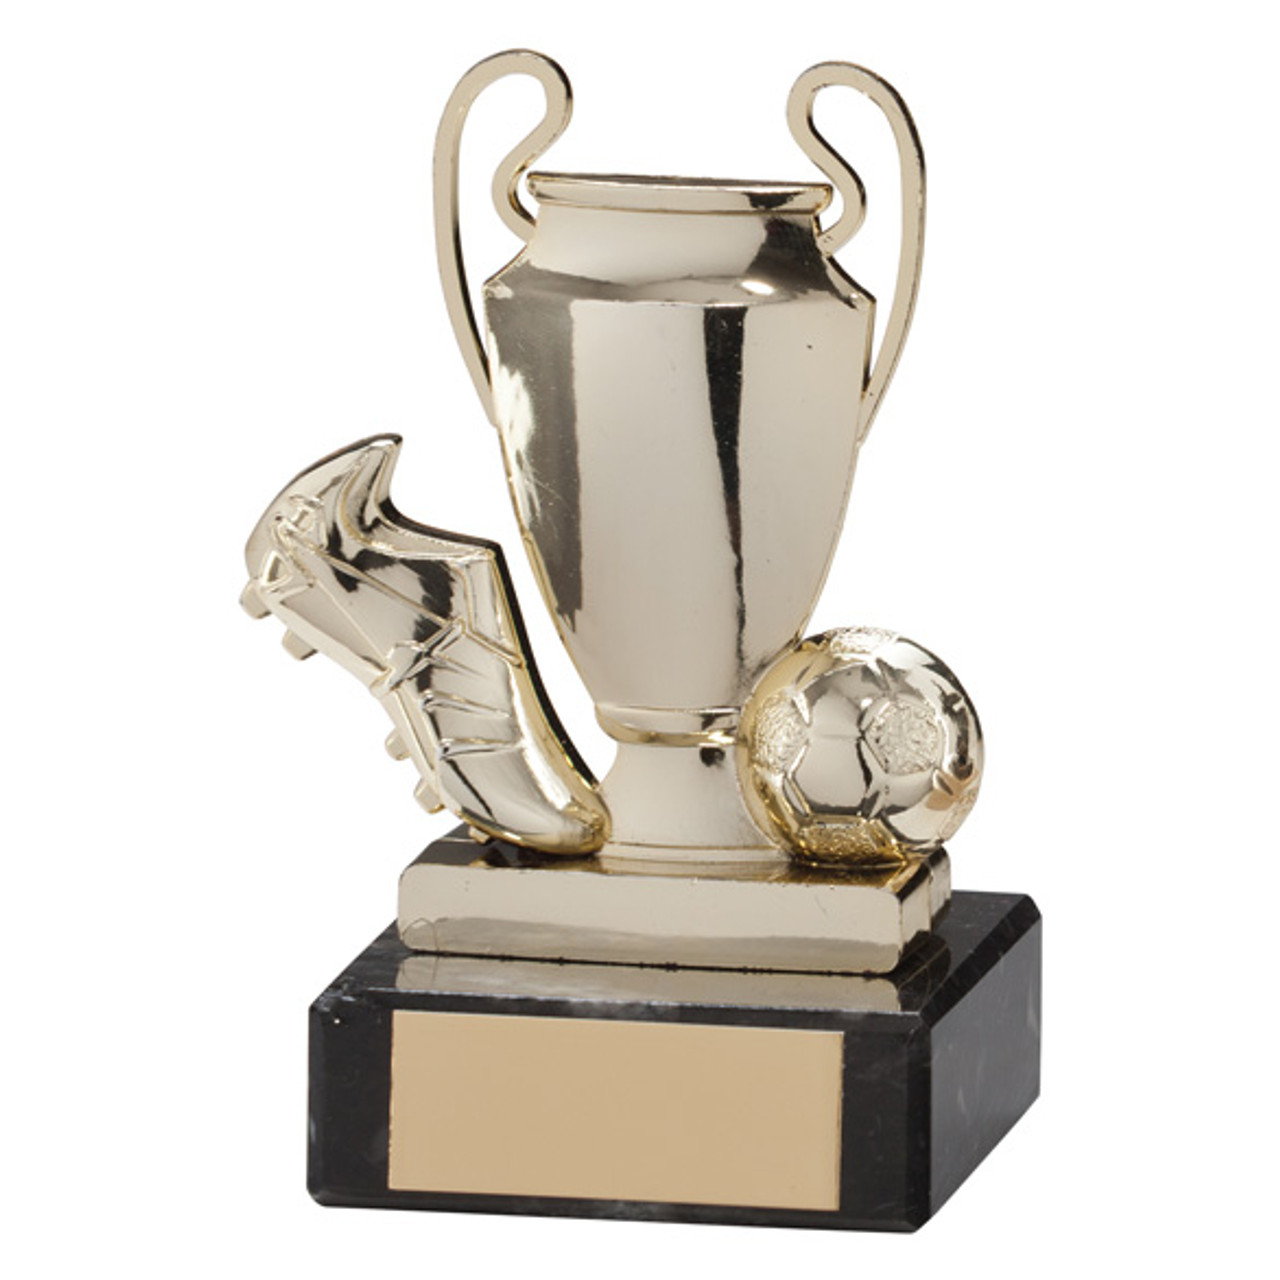 CHAMPIONS CUP Boot & Ball Football Trophy